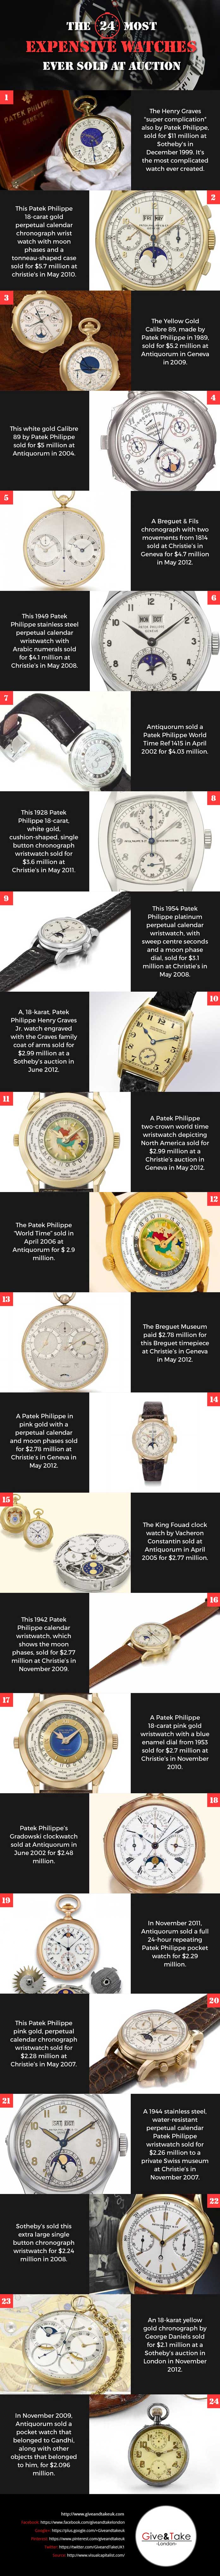 The 24 Most Expensive Watches Ever Sold at Auction